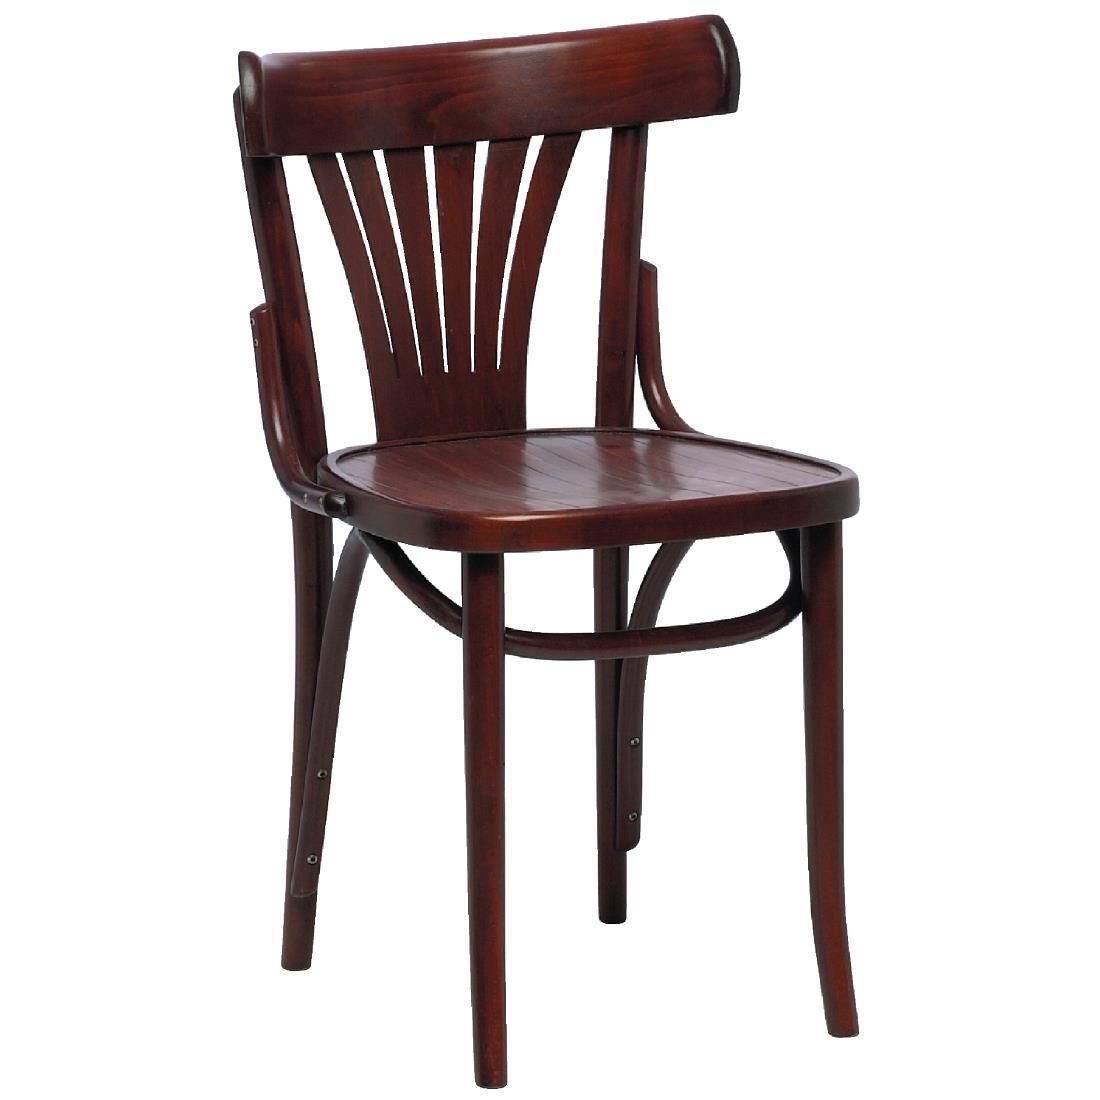 Fameg Bentwood Bistro Fan Back Side Chairs Walnut (Pack of 2) JD Catering Equipment Solutions Ltd